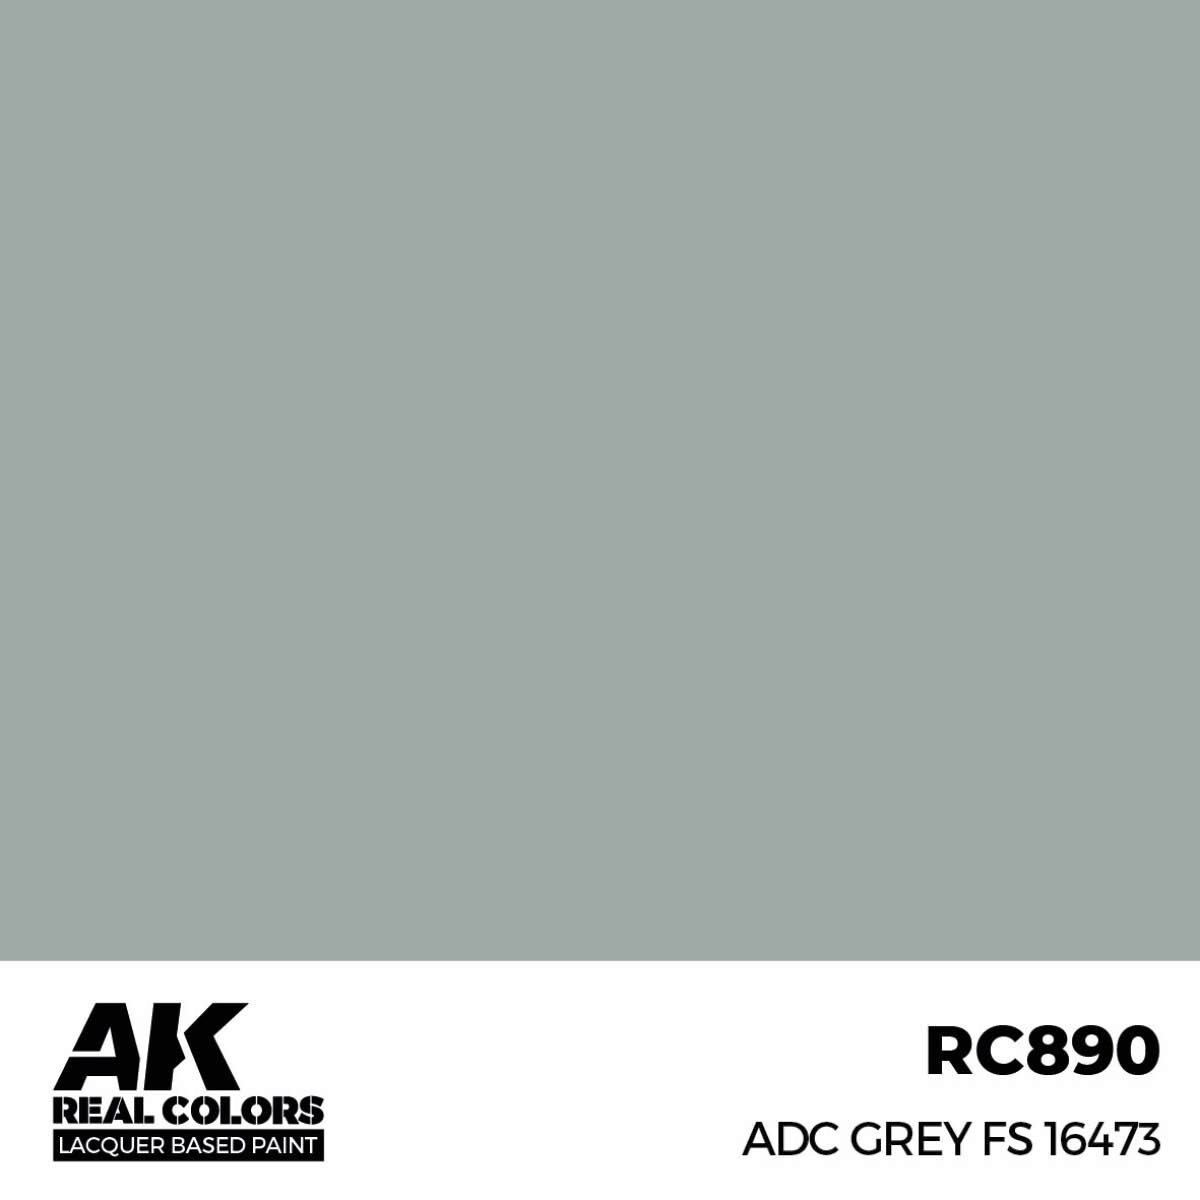 AK RC890 Real Colors ADC Grey FS 16473 17 ml.